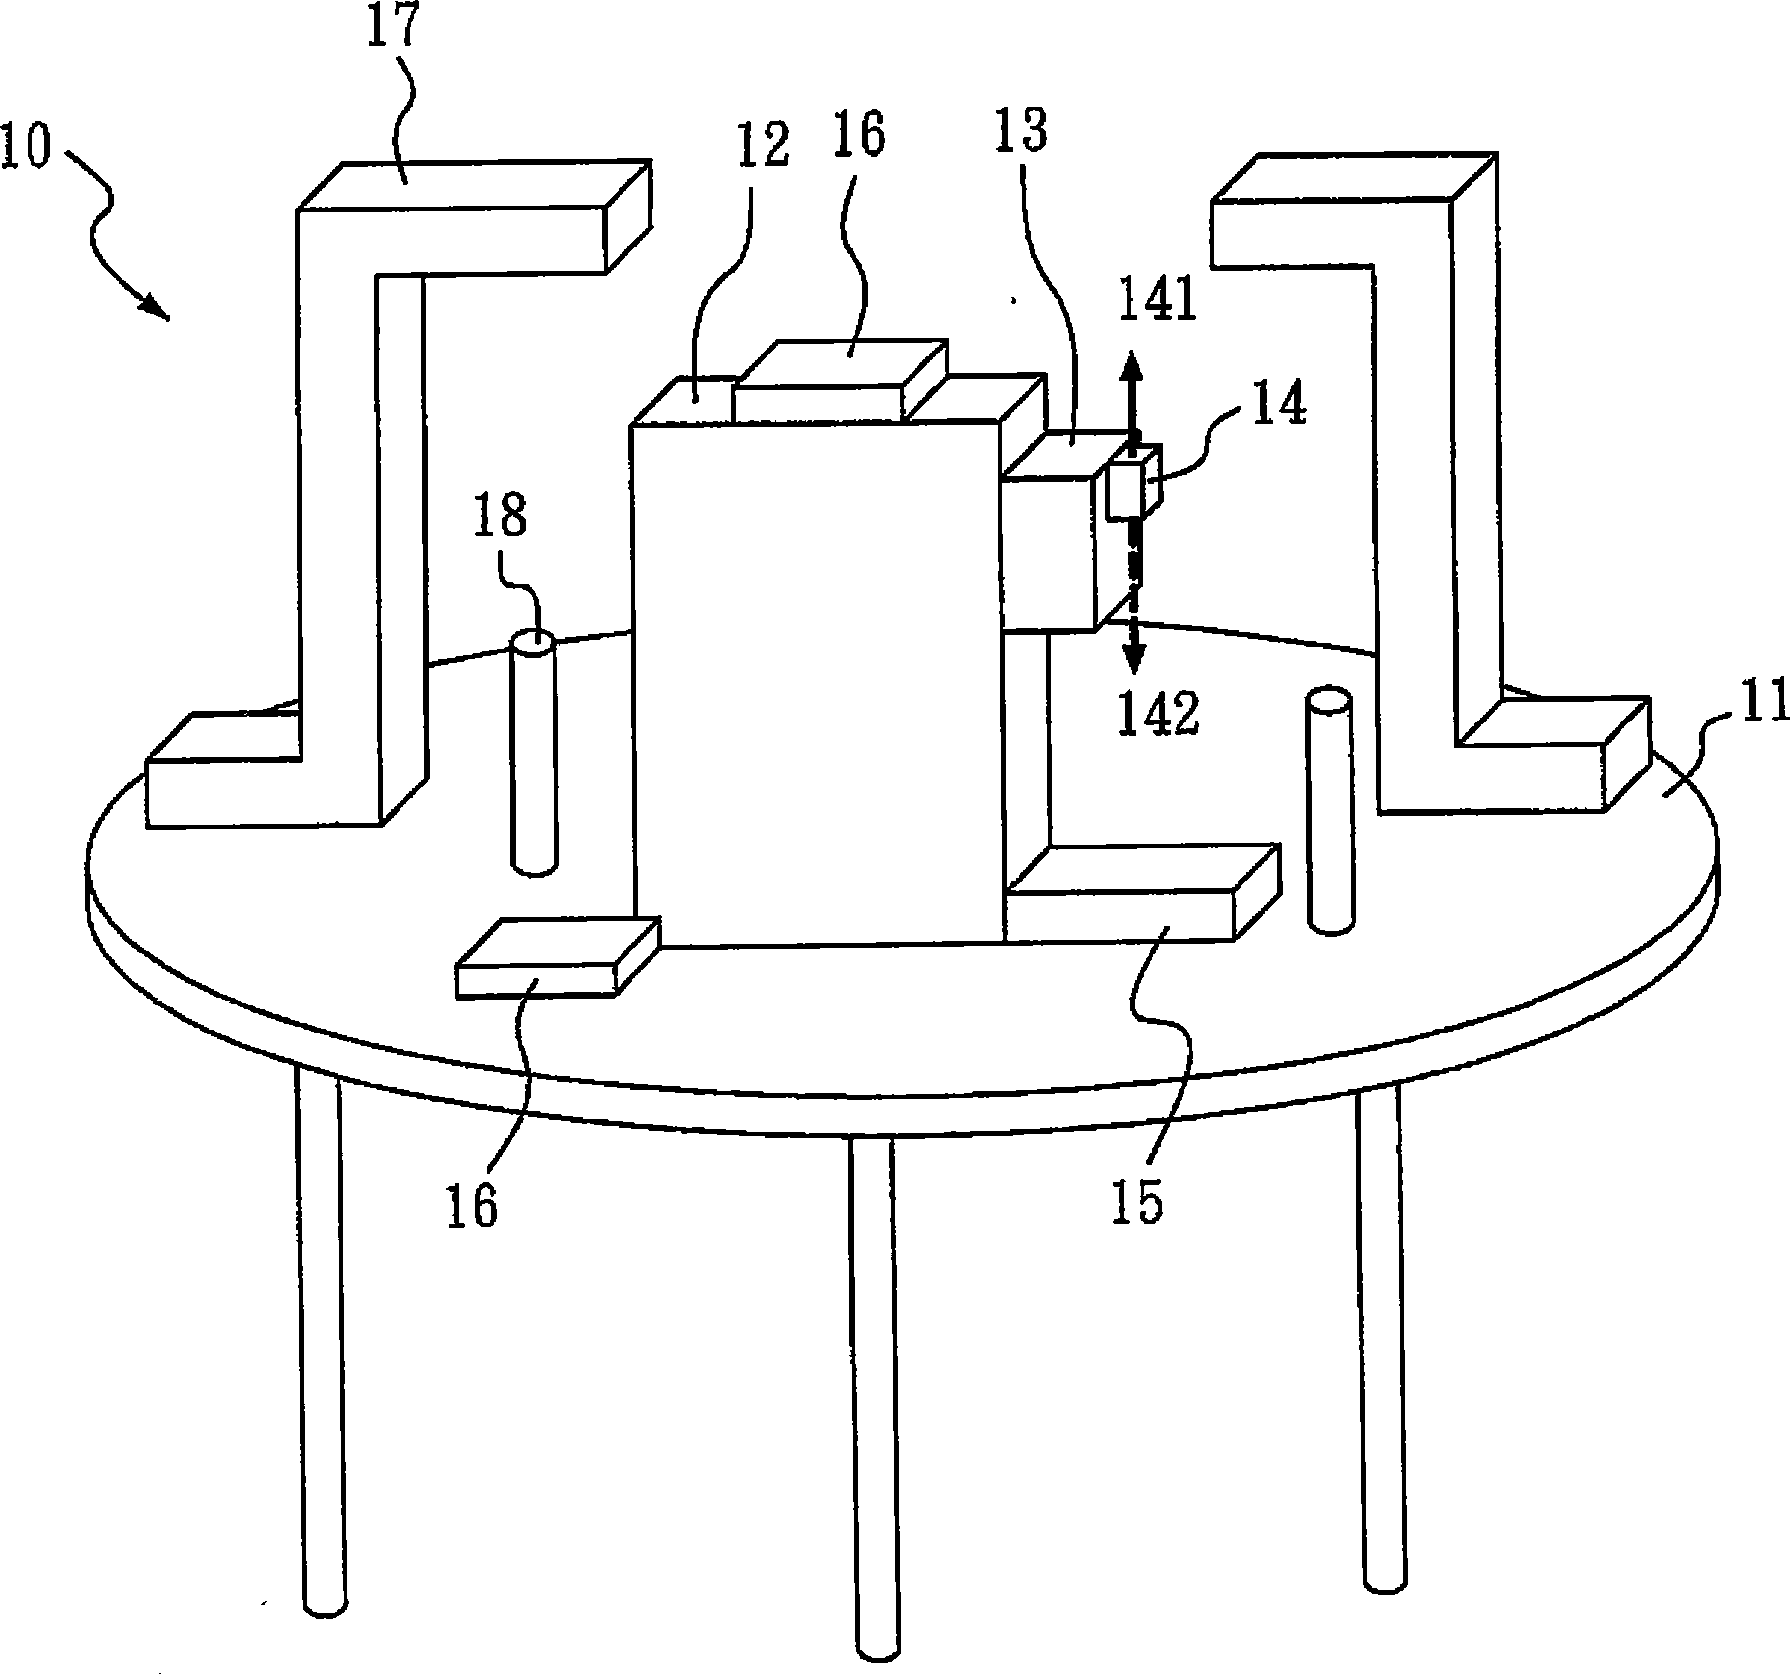 Optical device containing laser diode and luminous diode